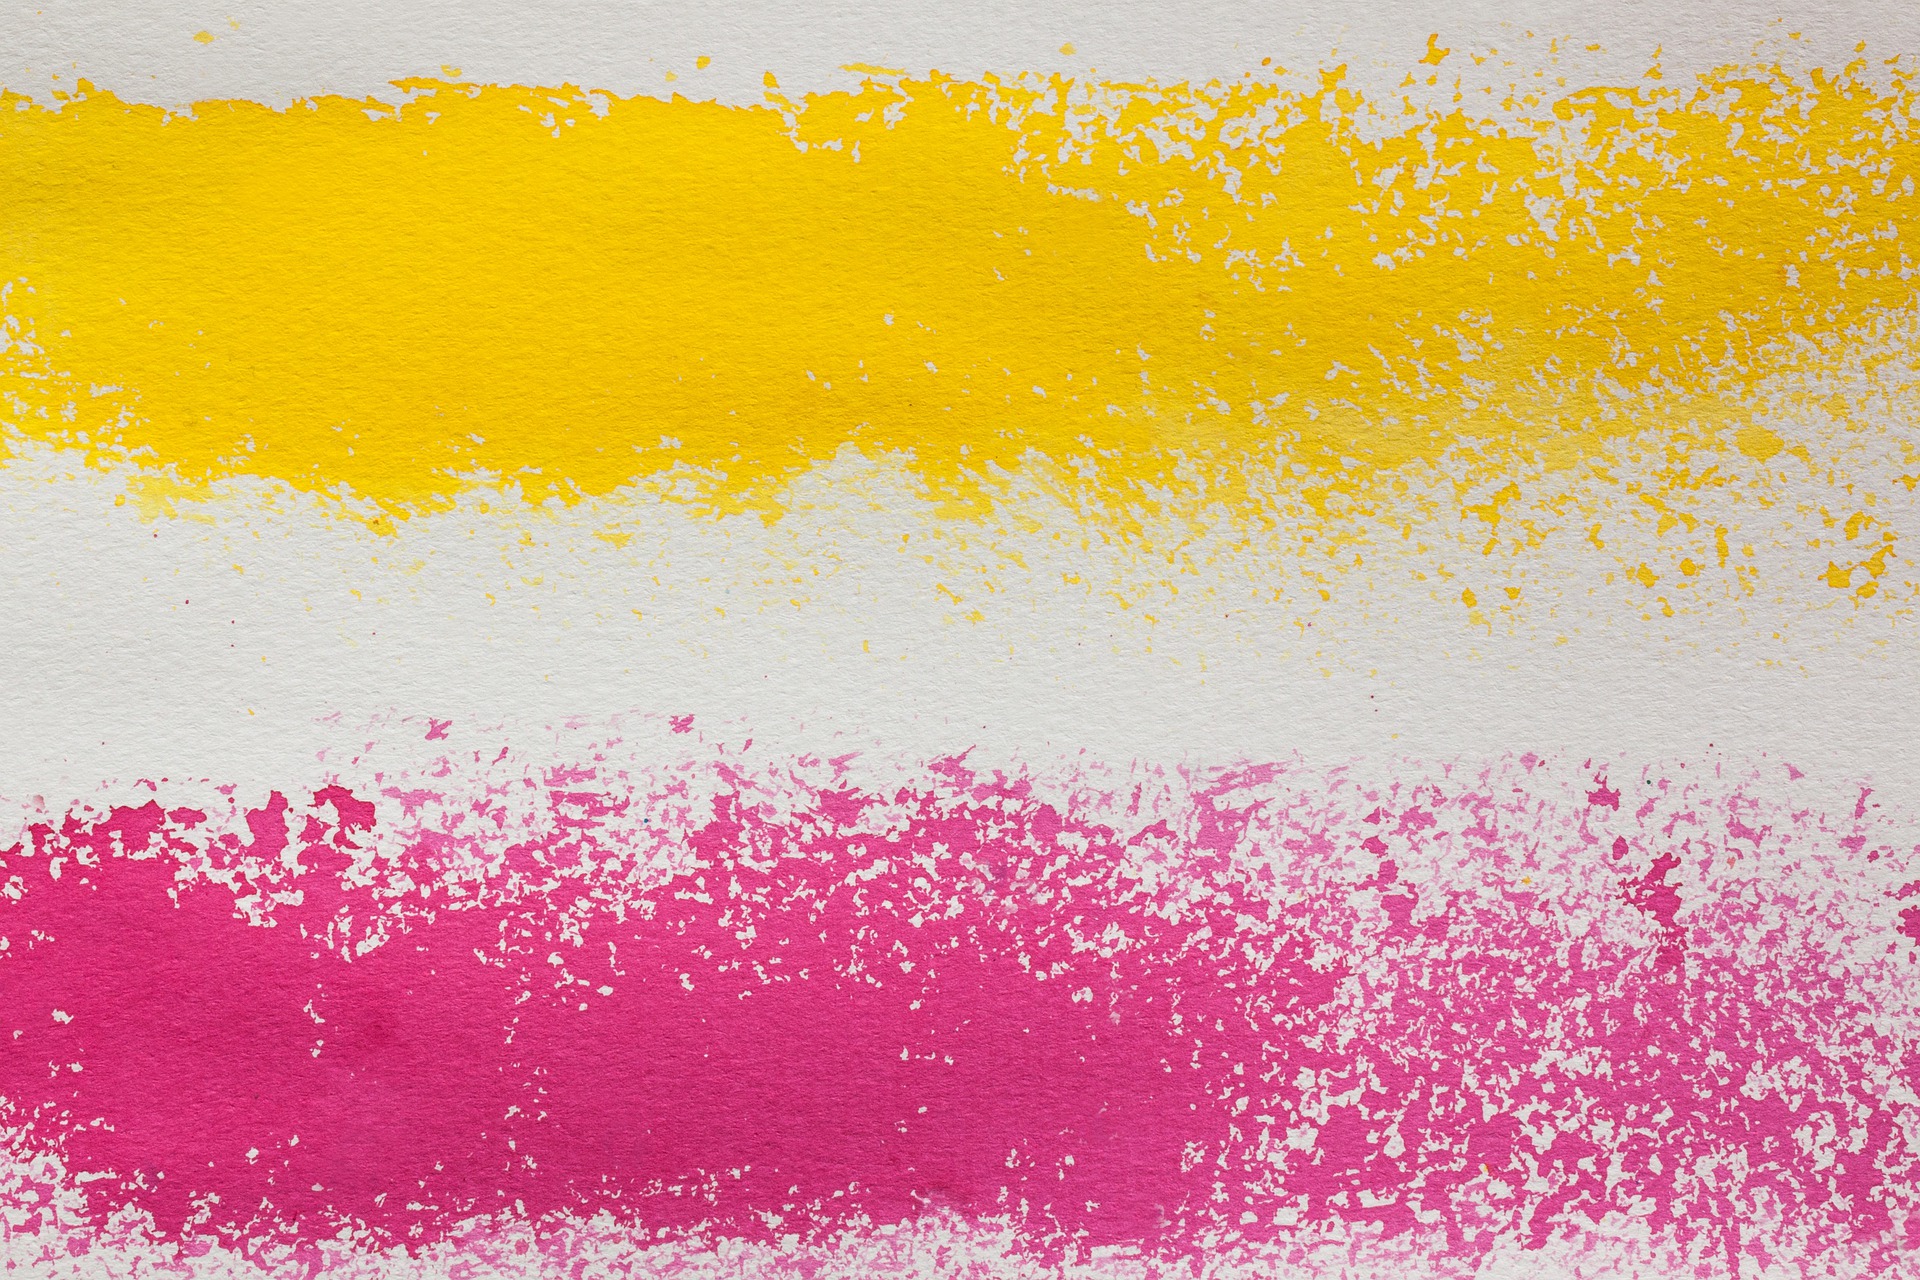 What Color Do Pink and Yellow Make, Mixed? - Drawings Of